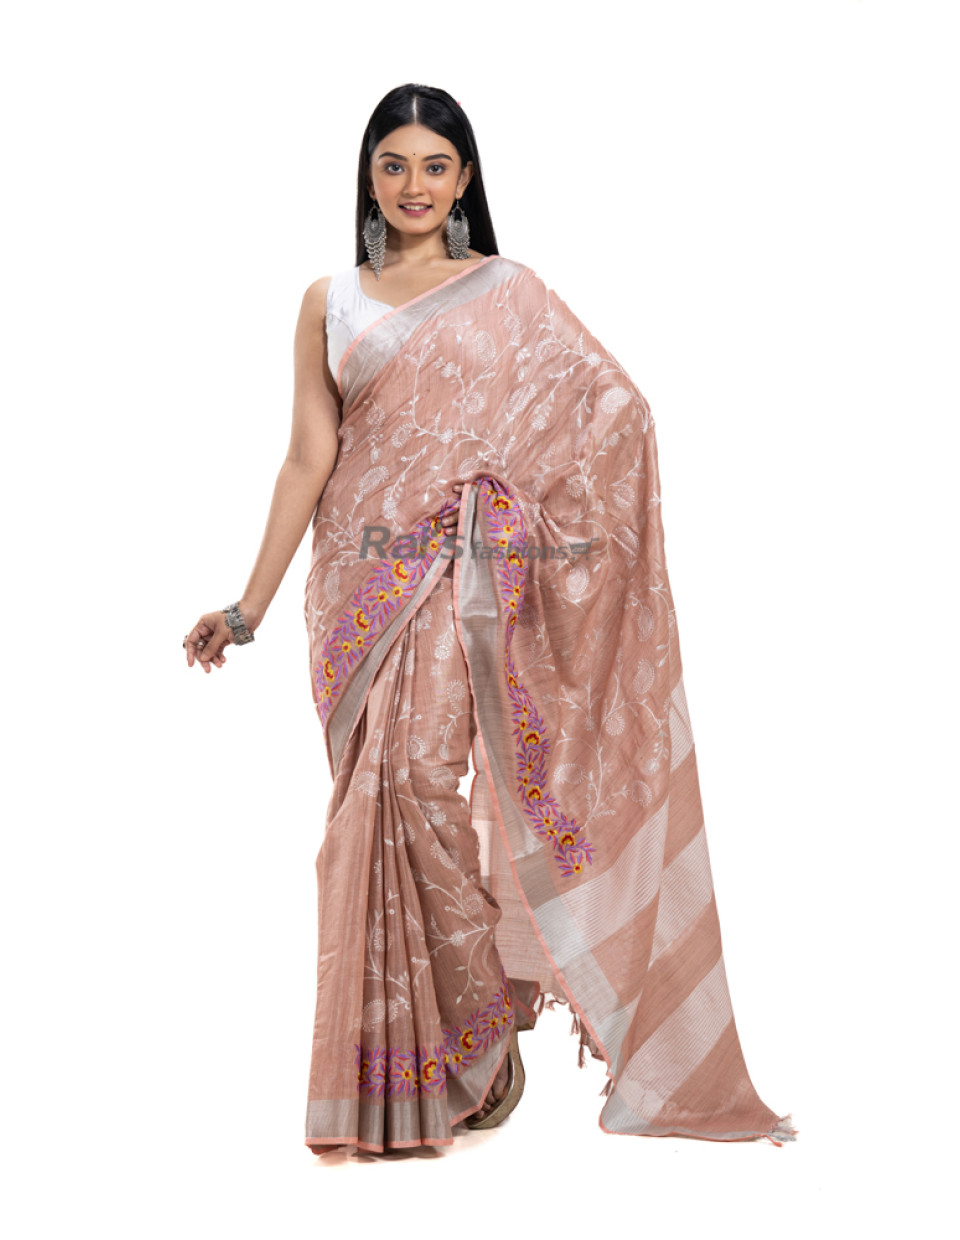 Dupion Silk Cotton Saree With All Over Embroidery Work And Silver Zari Border (RNW7)